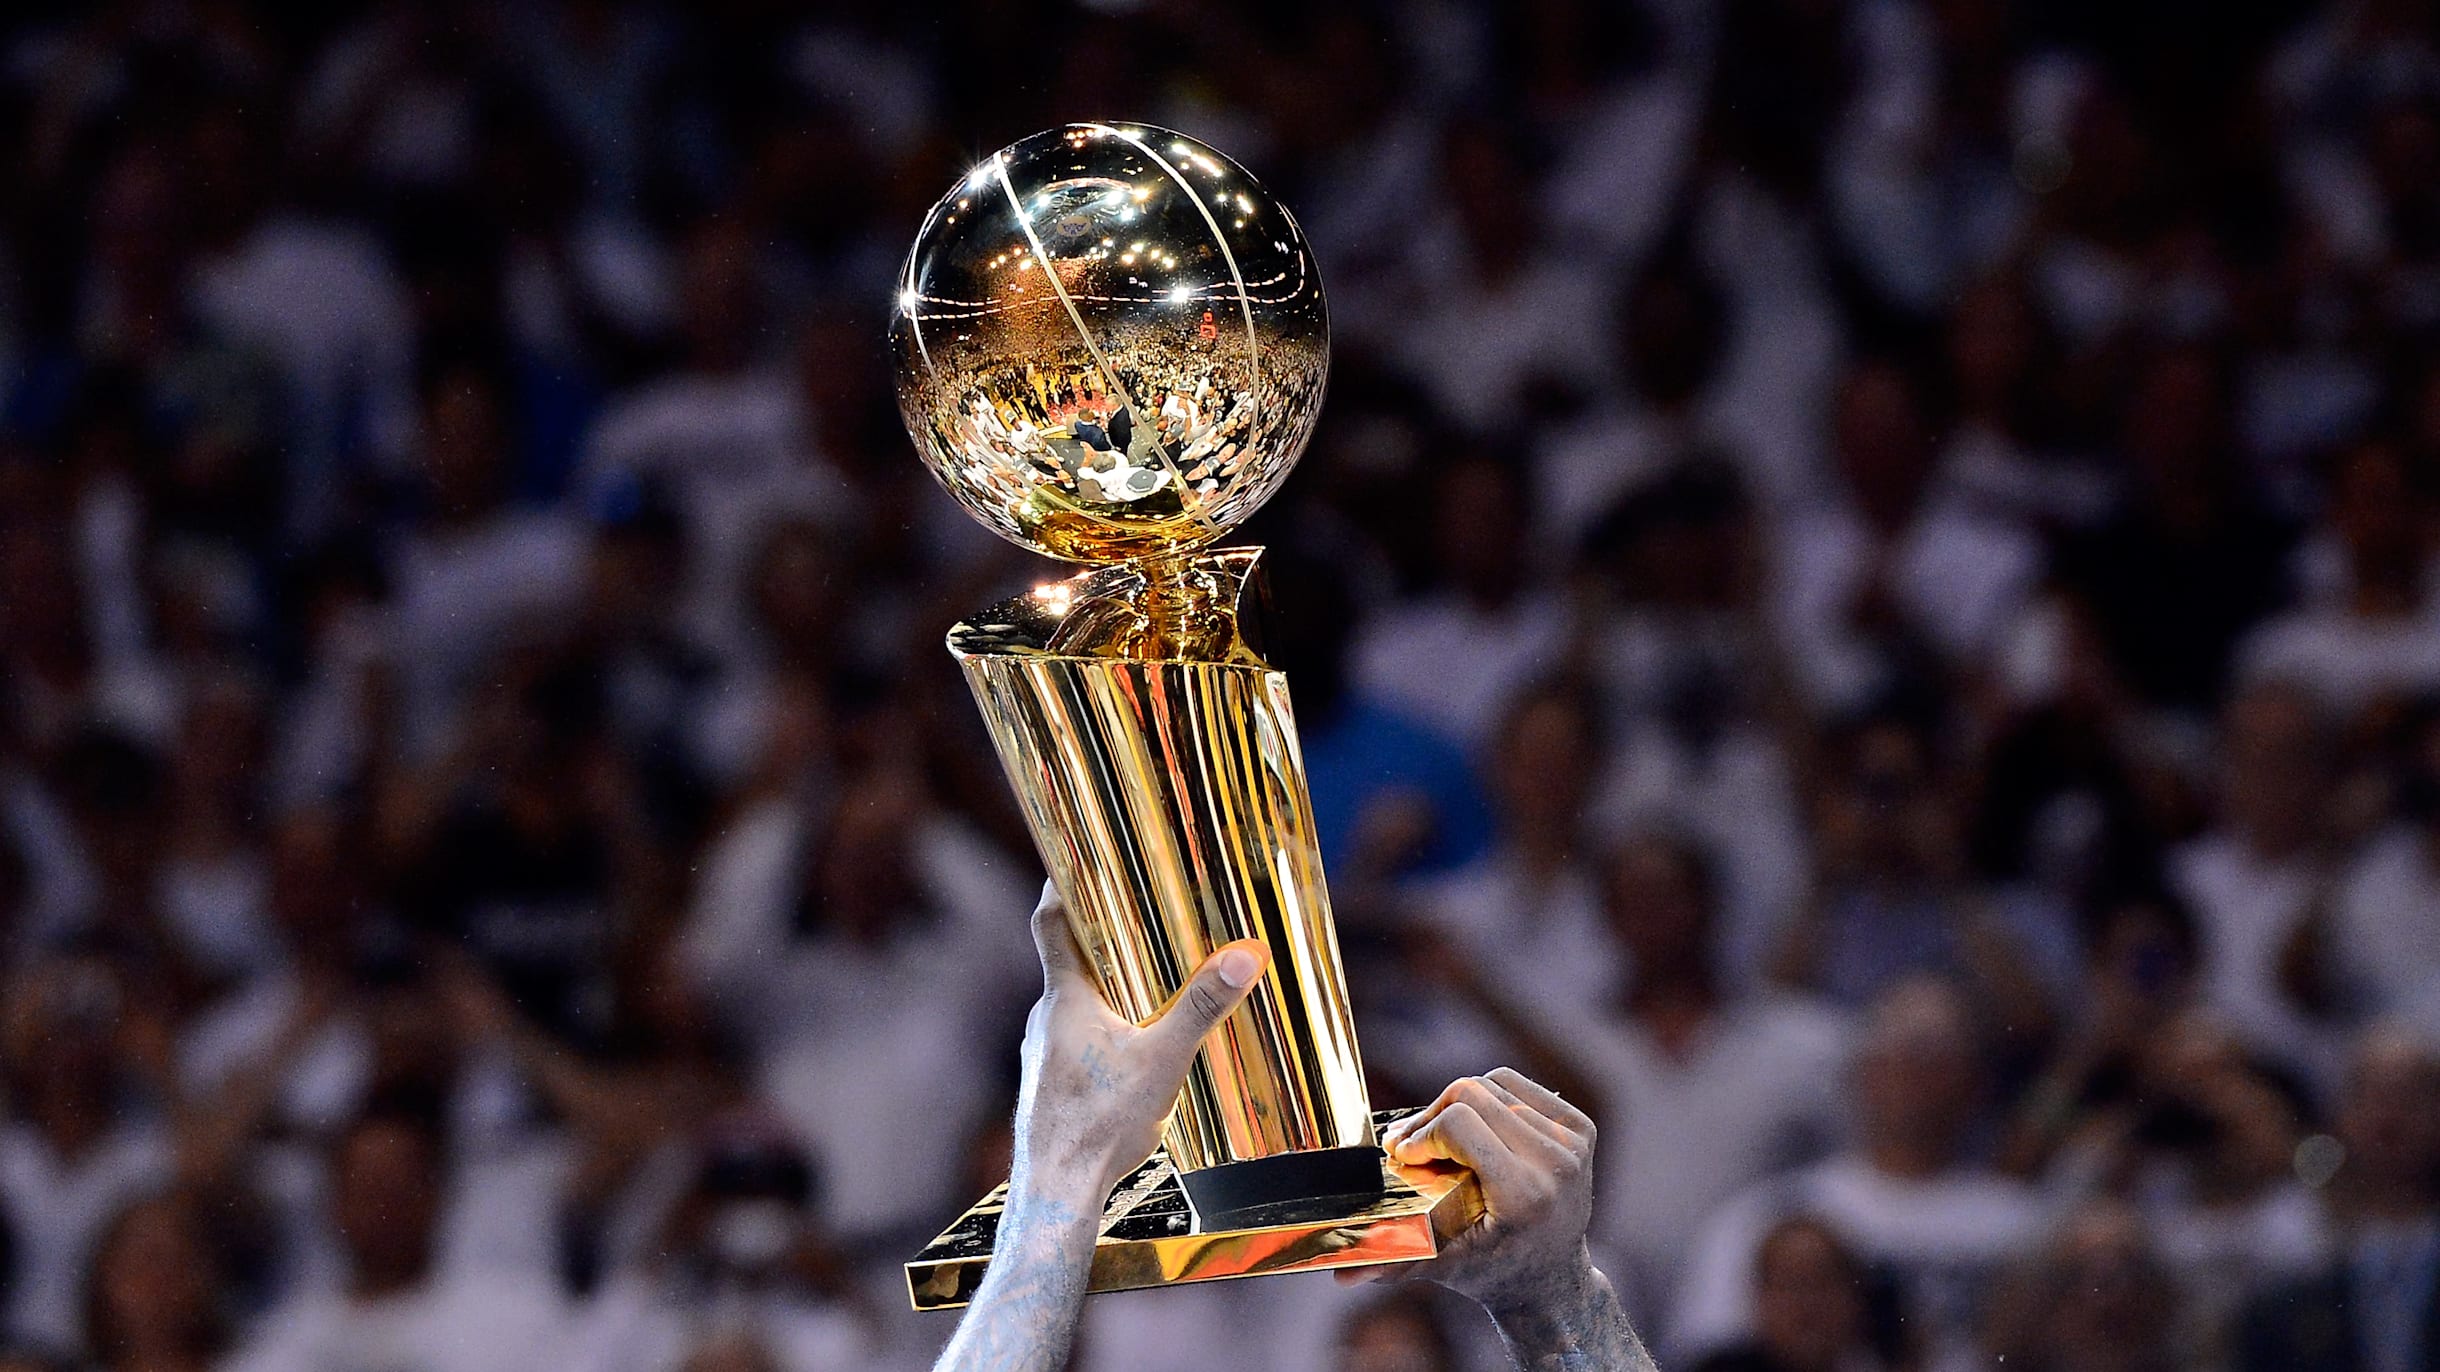 EXPLAINED: What is a Championship Trophy Photo?